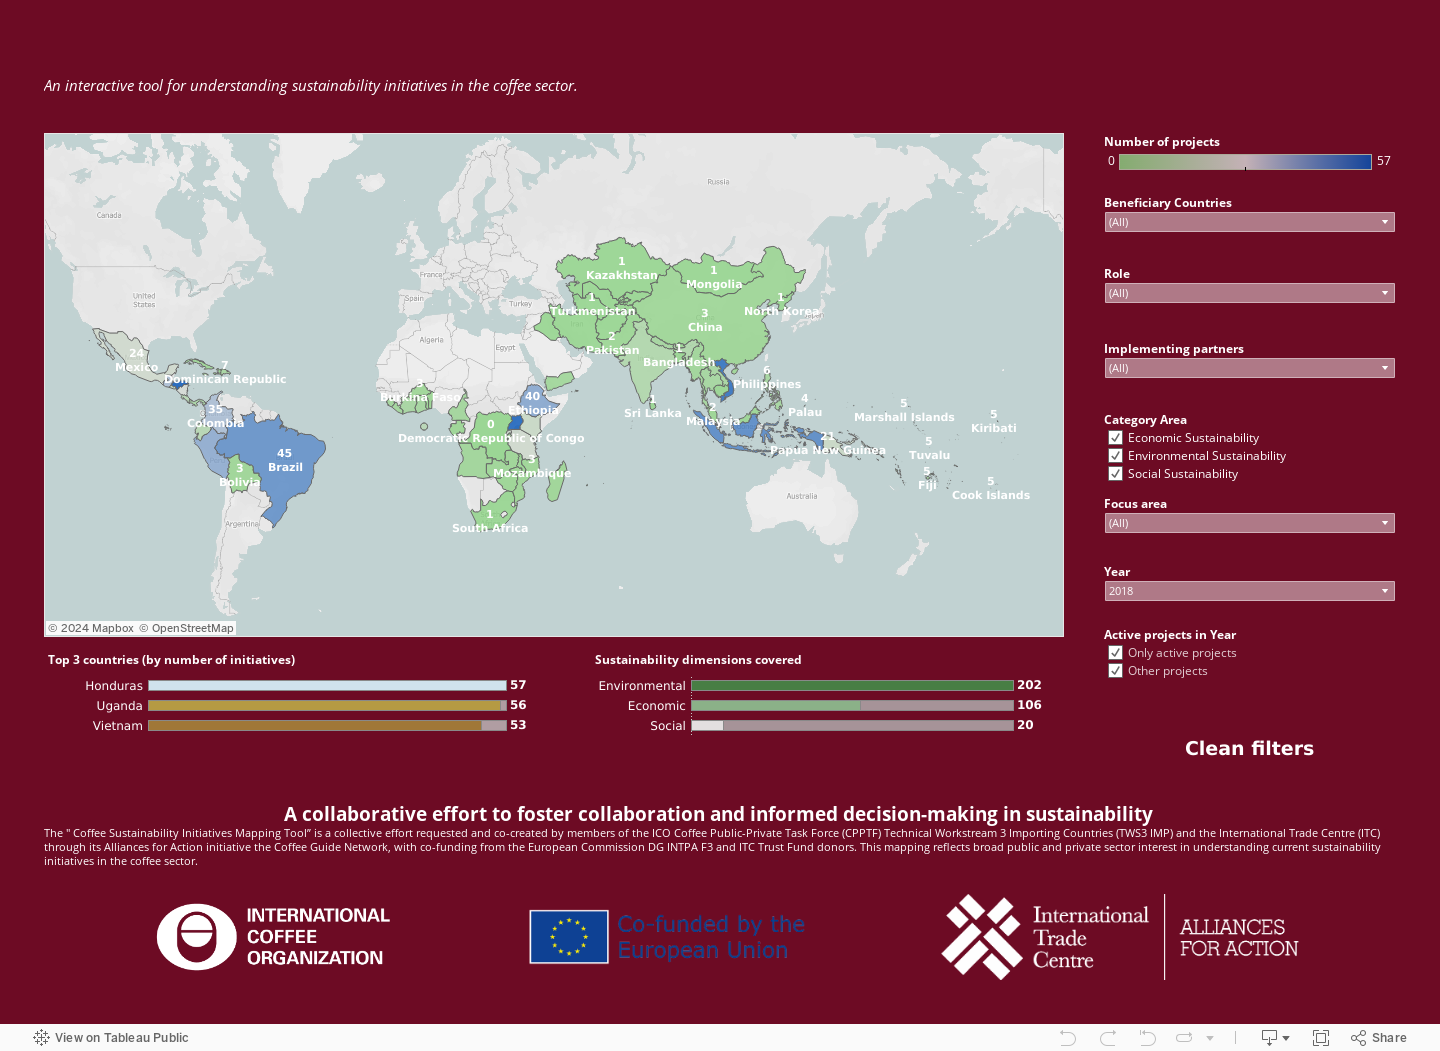 Coffee Sustainability Initiatives MapBased on publicly available information and stakeholder reports for initiatives implemented during the time period 2017-2027 